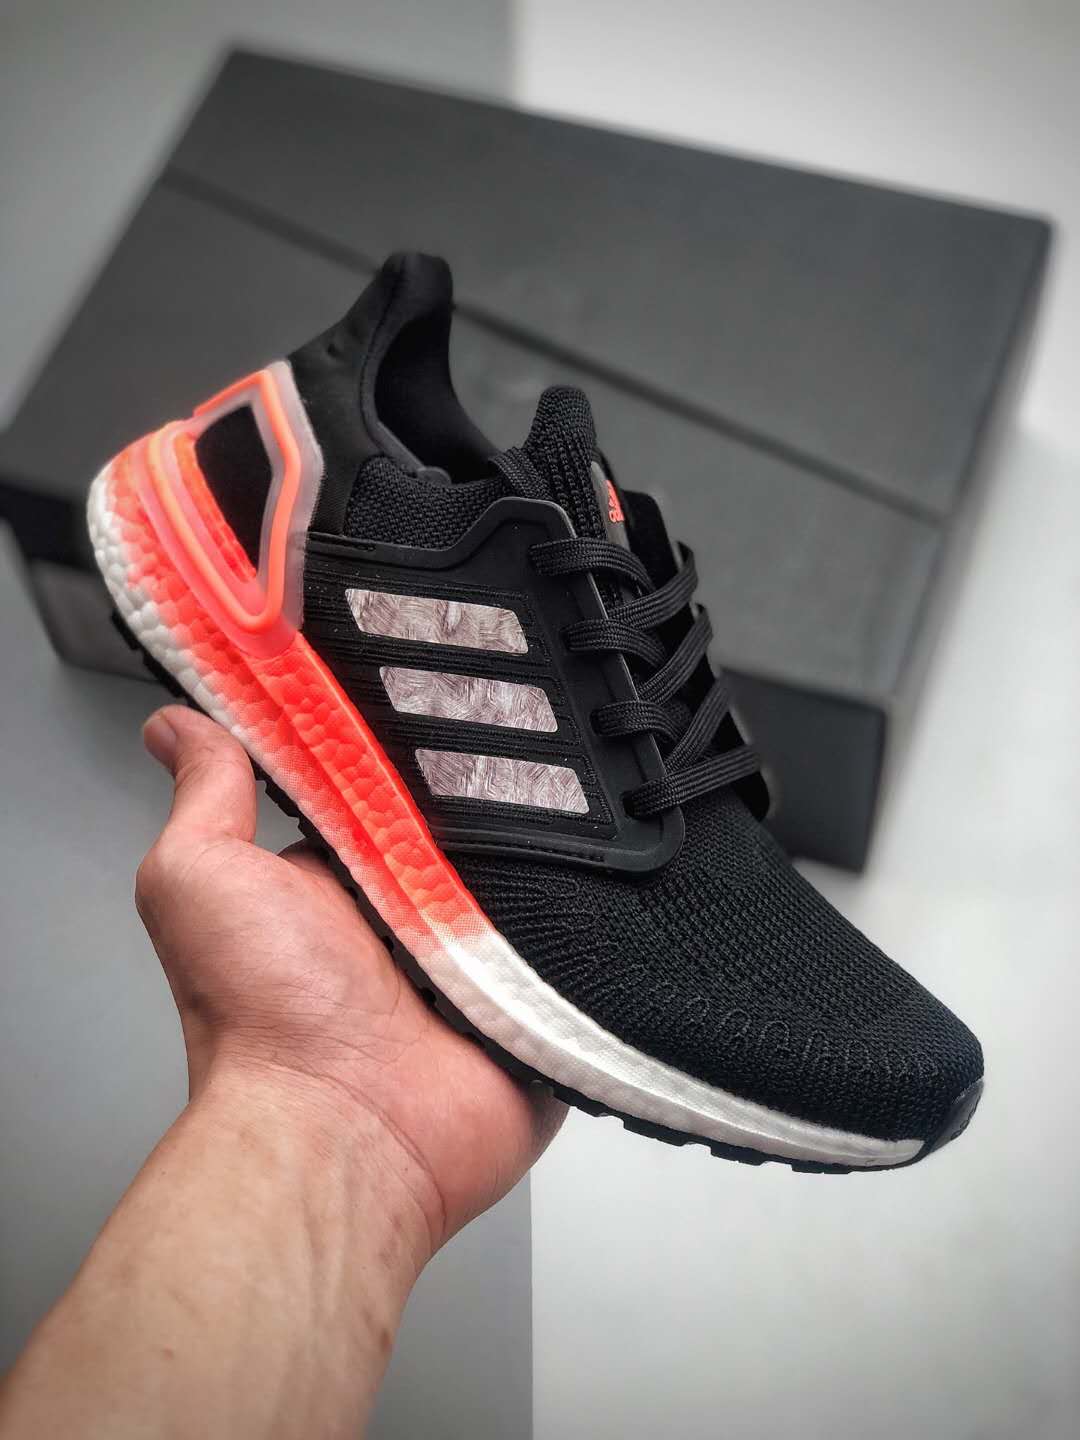 Adidas UltraBoost 20 'Signal Coral' EG0756 - Shop Now for the Latest Release!